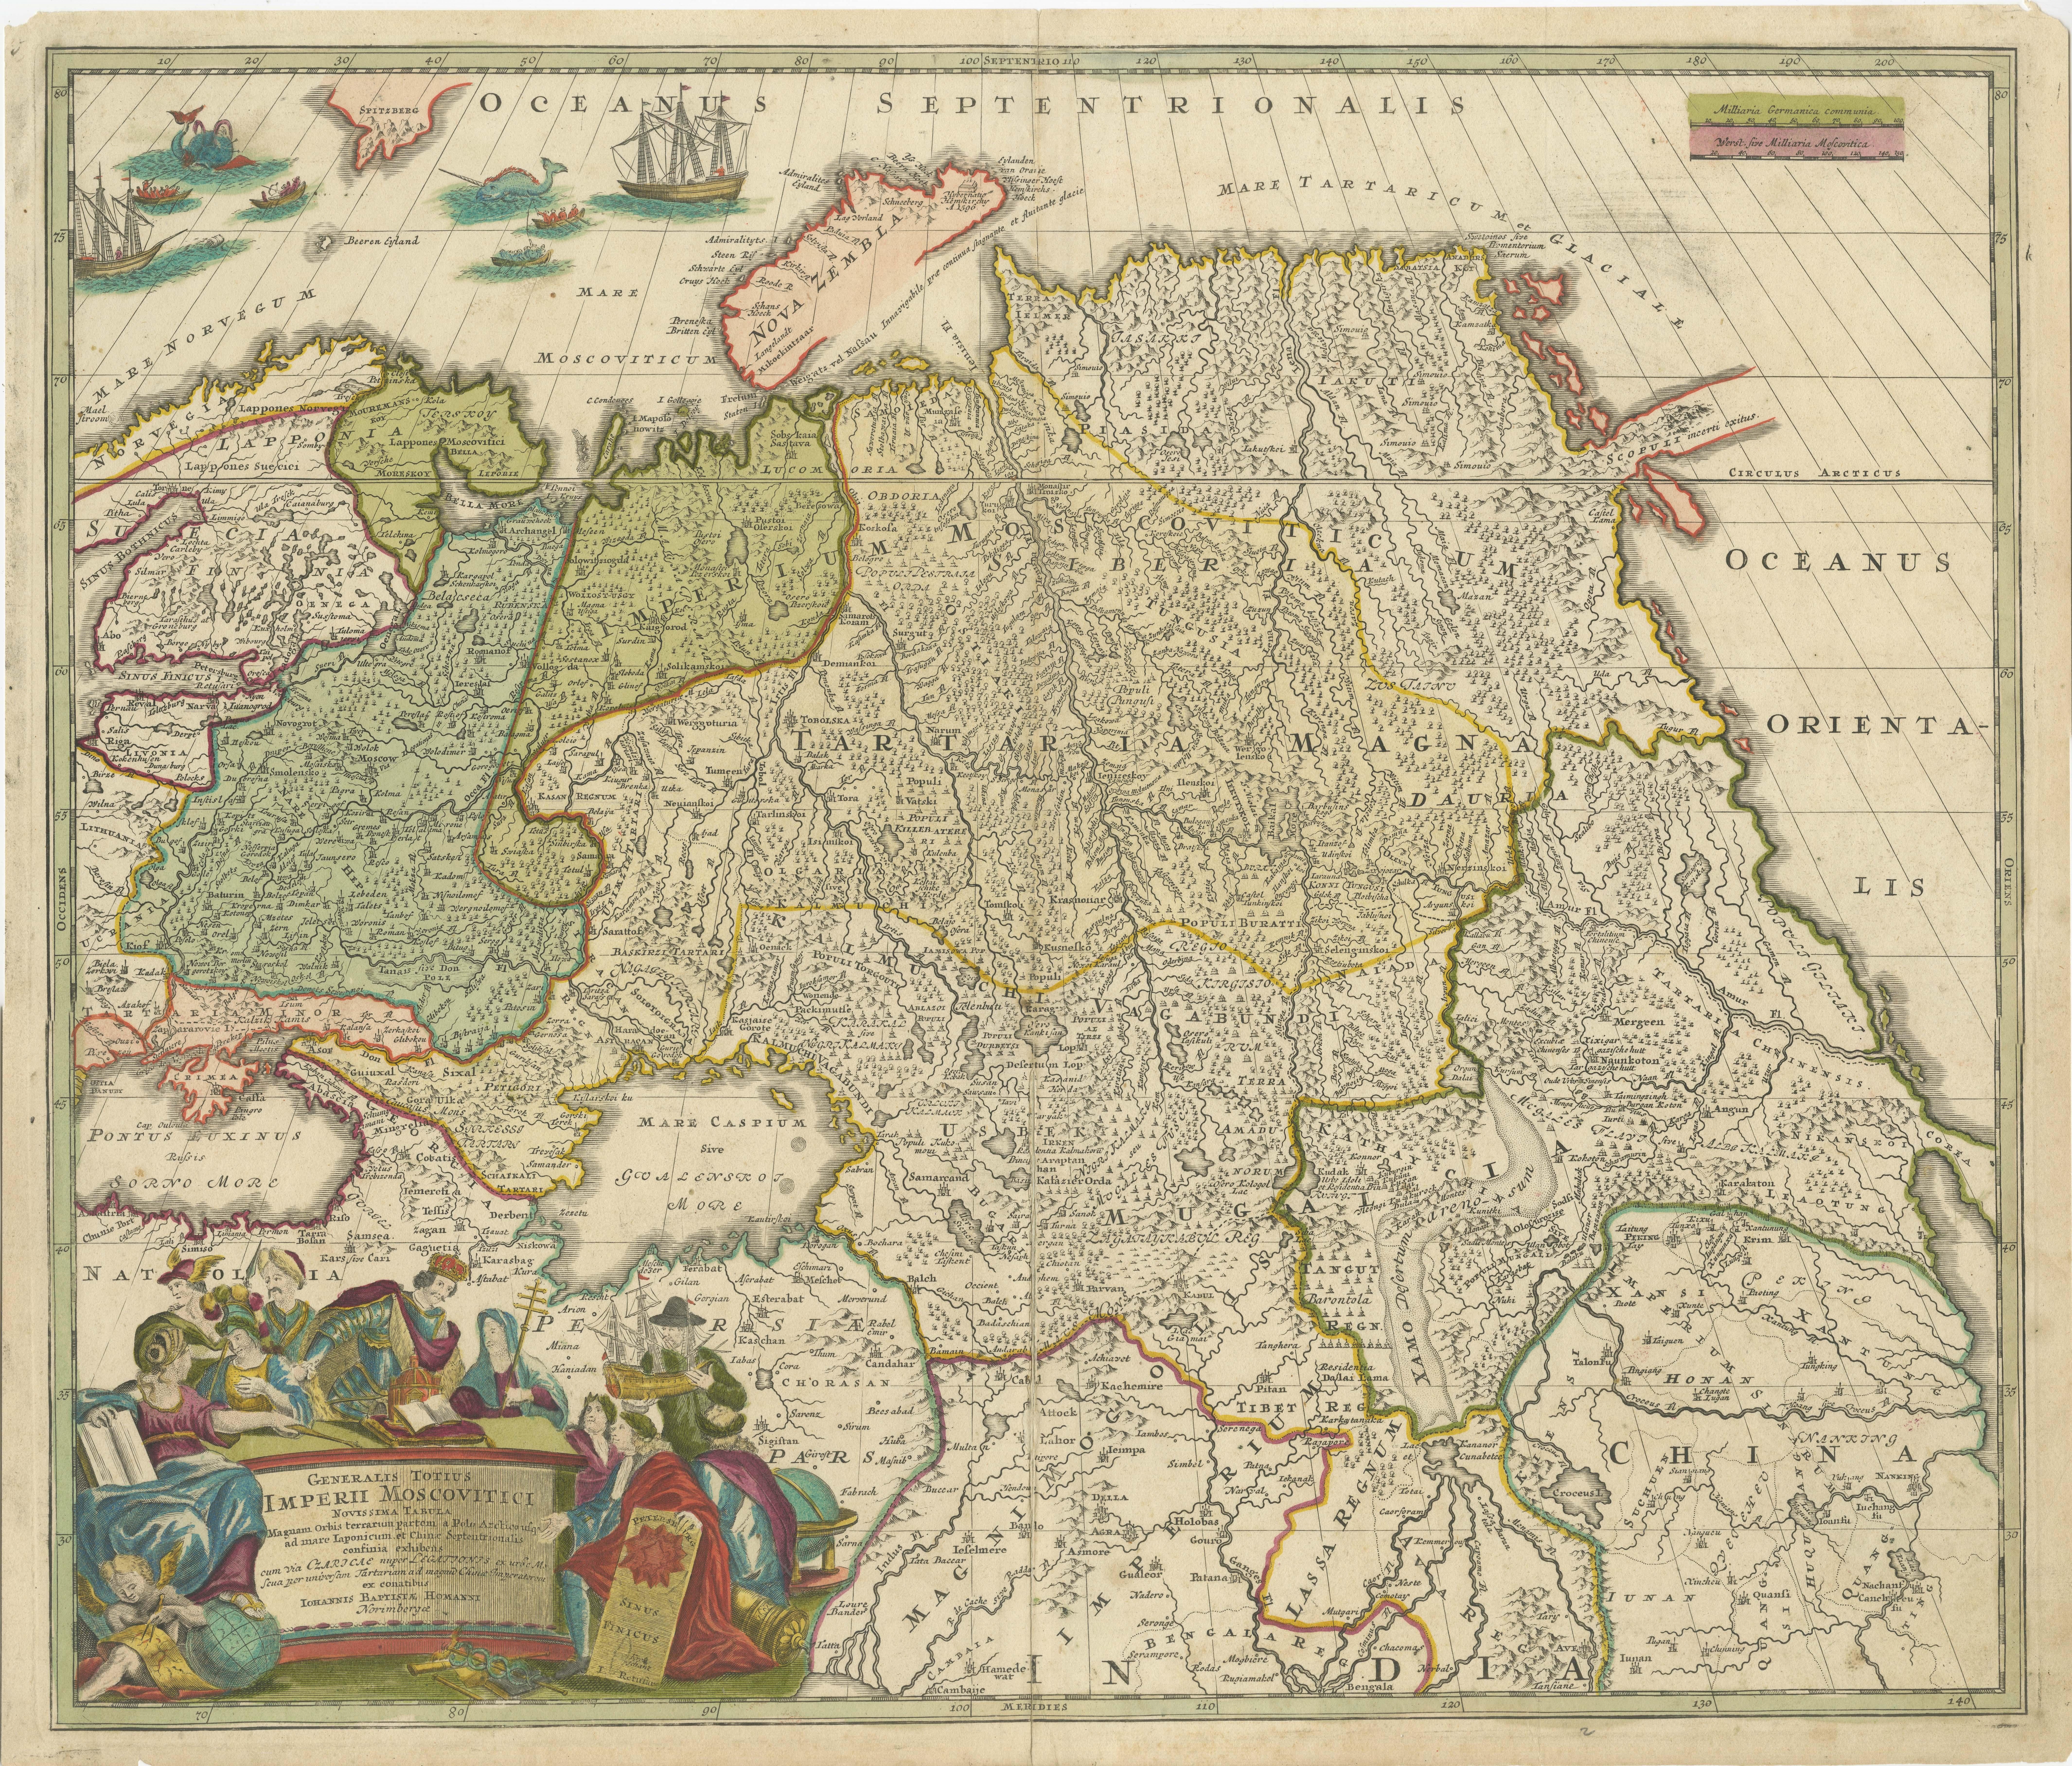 Antique map titled 'Generalis Totius Imperii Moscovitici (..)'. Decorative map of Russia and Central Asia, showing the Northeast Passage. The map covers the entirety of the Russian Empire at the time, stretching from the Arctic Circle in the north